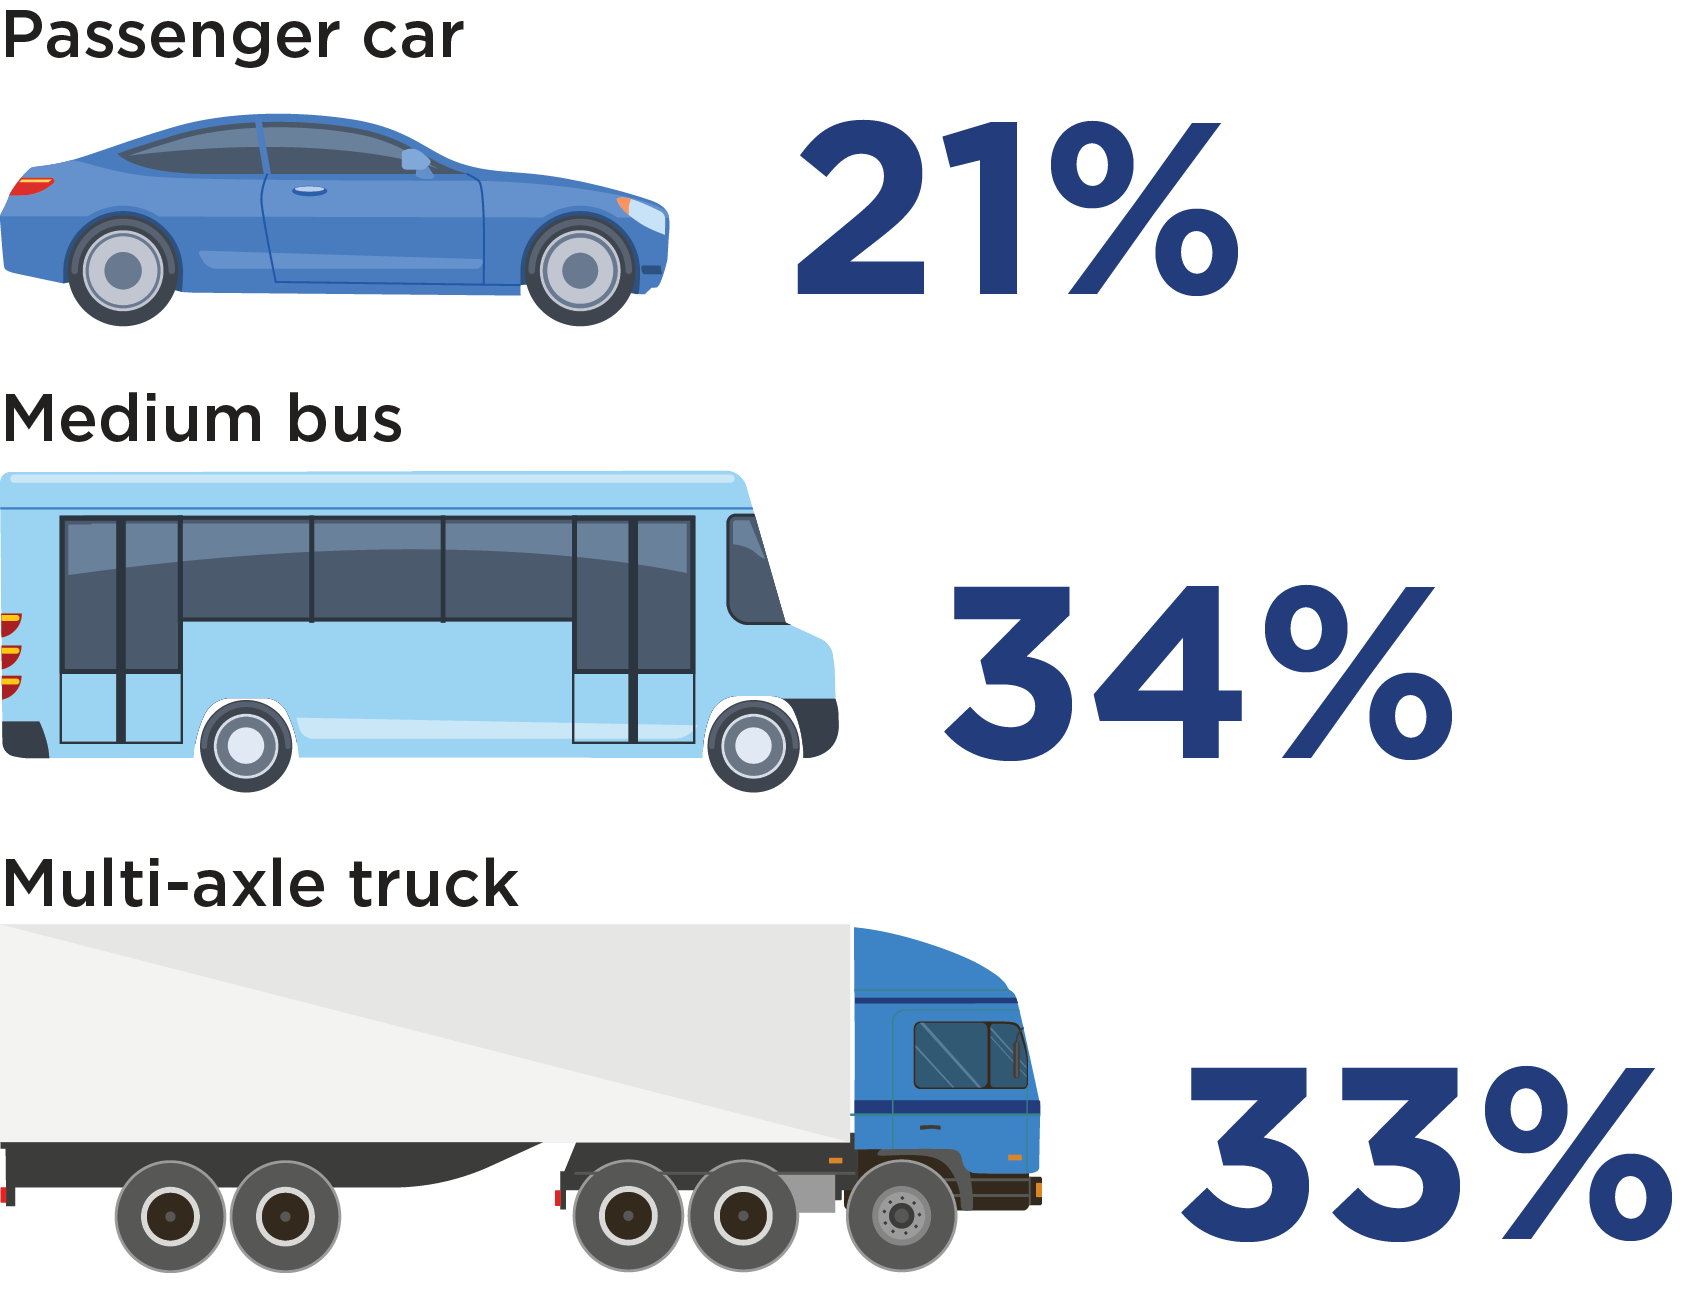 Passenger cars saved 21% in vehicle operating costs; medium buses saved 34%; and multi-axle trucks saved 33%.